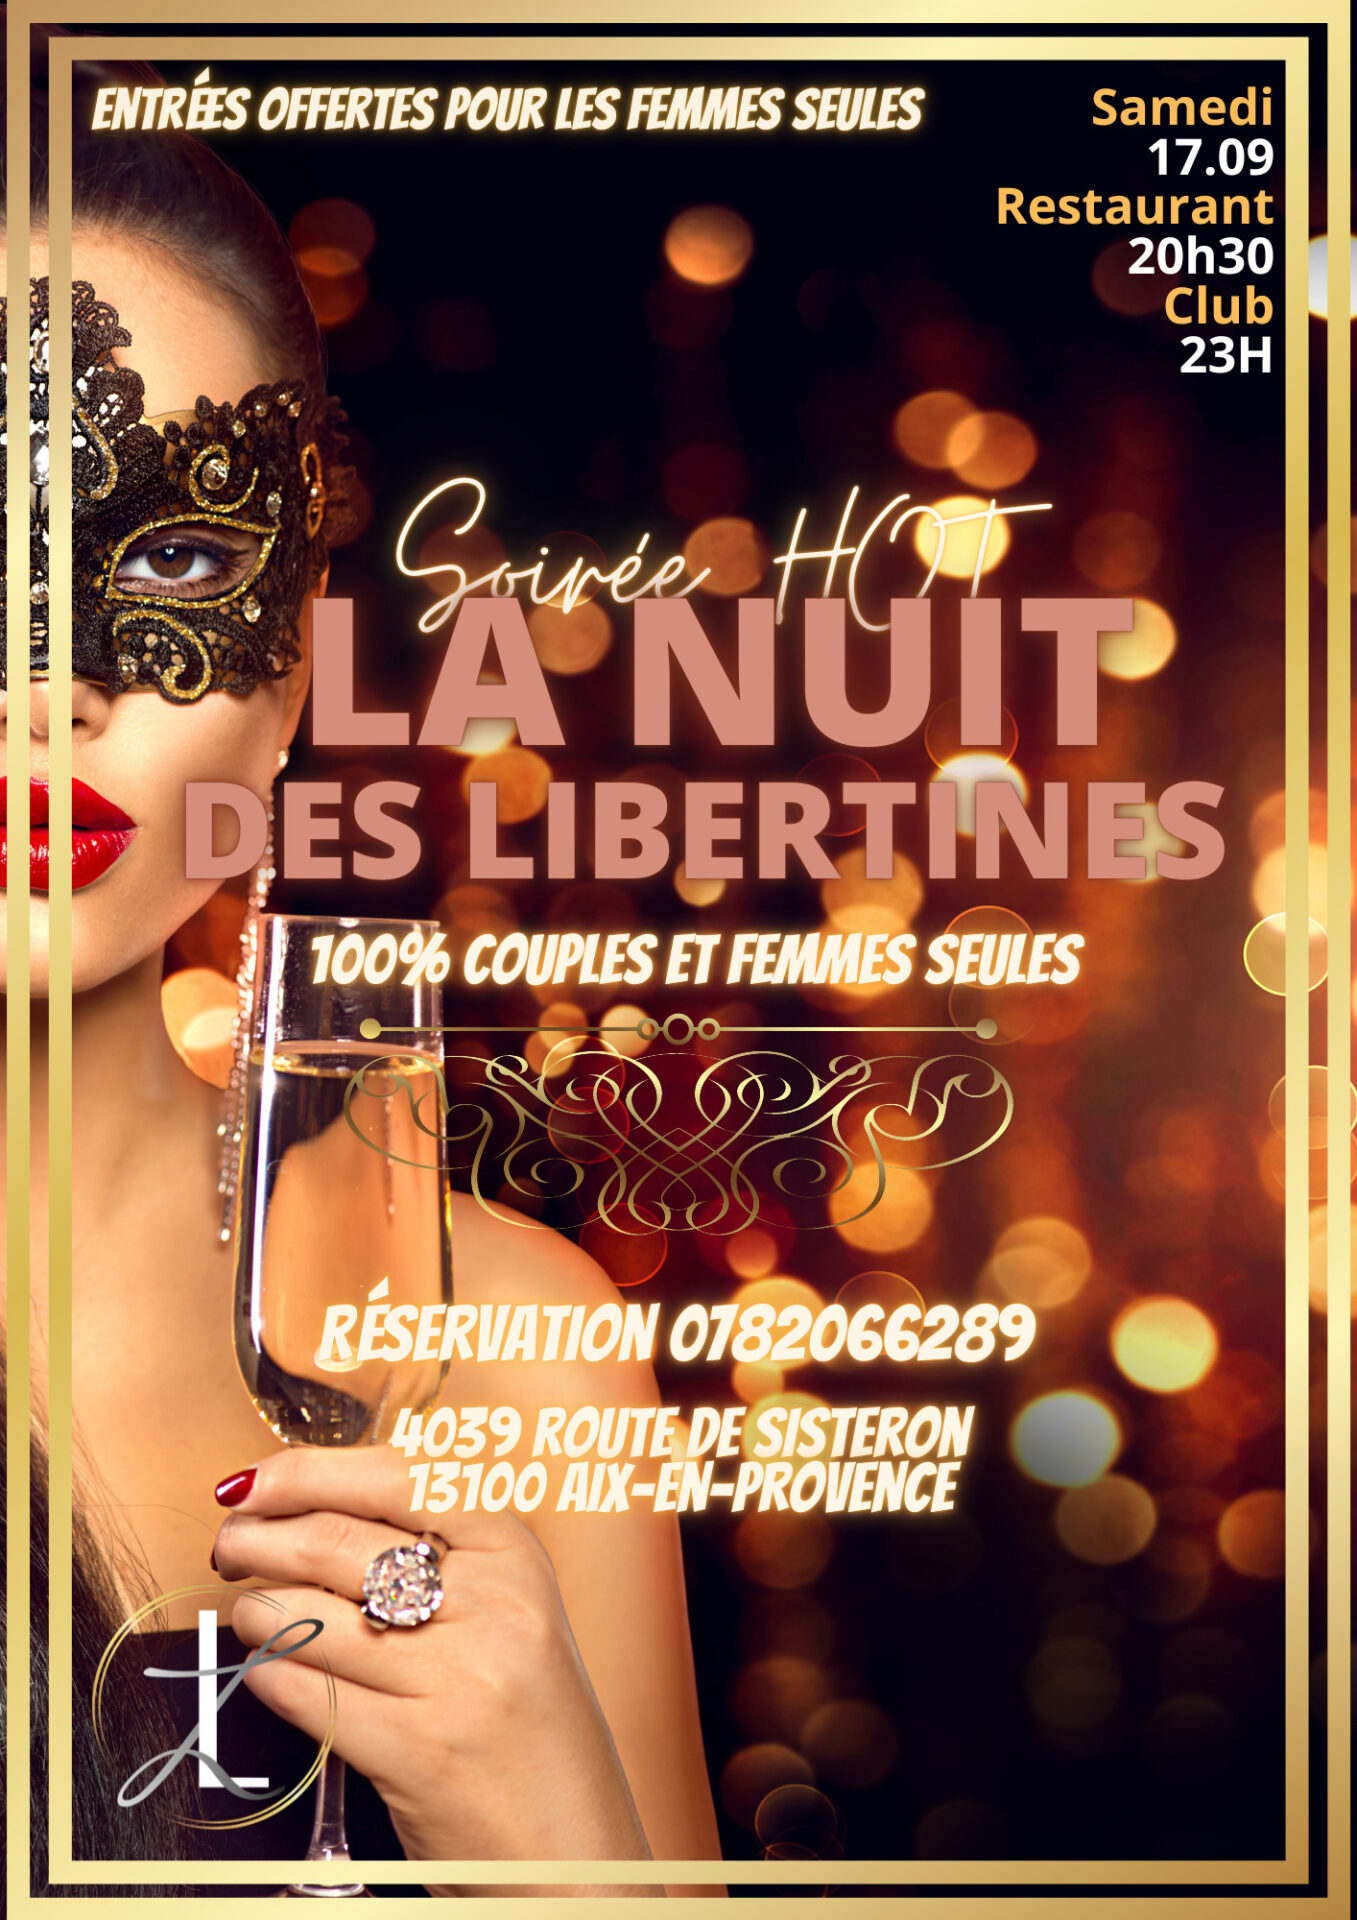 soiree couples femmes nuits libertines